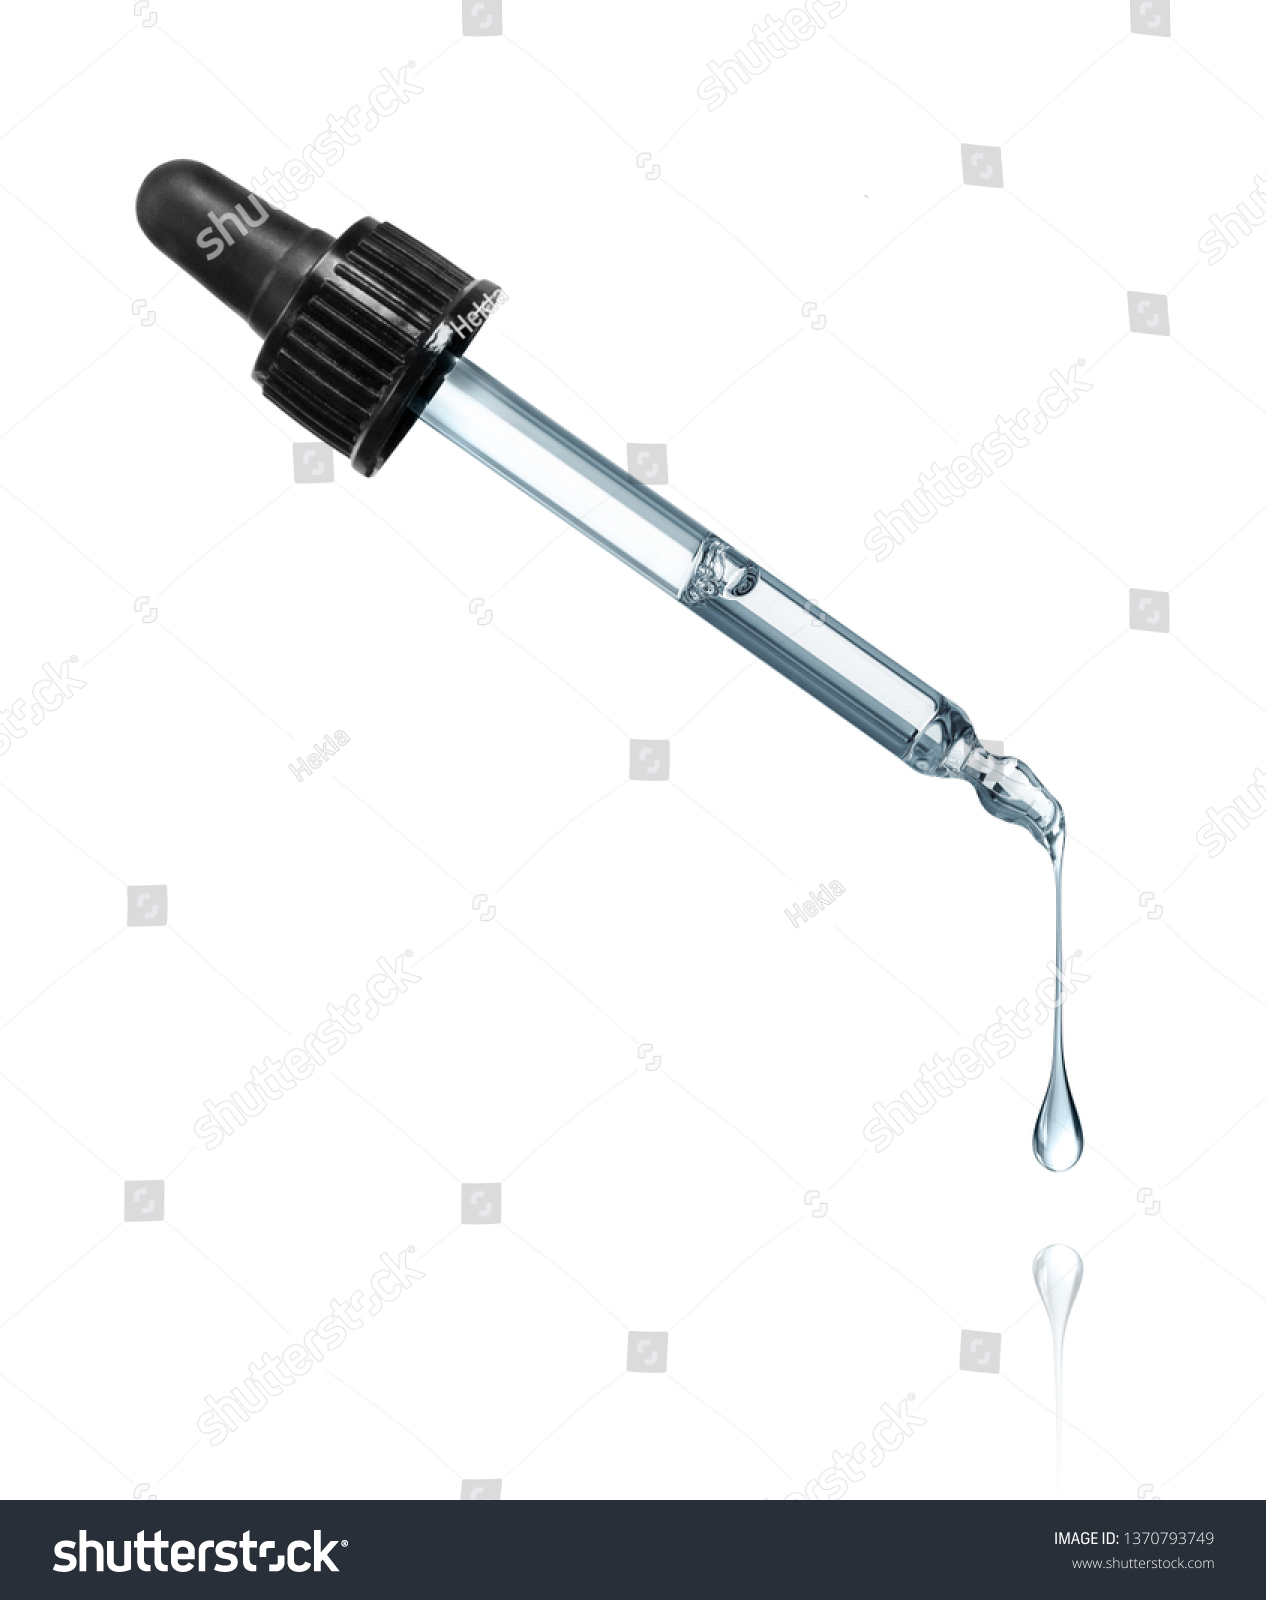 Thick drop is dripping down from cosmetic pipette on a white background #1370793749